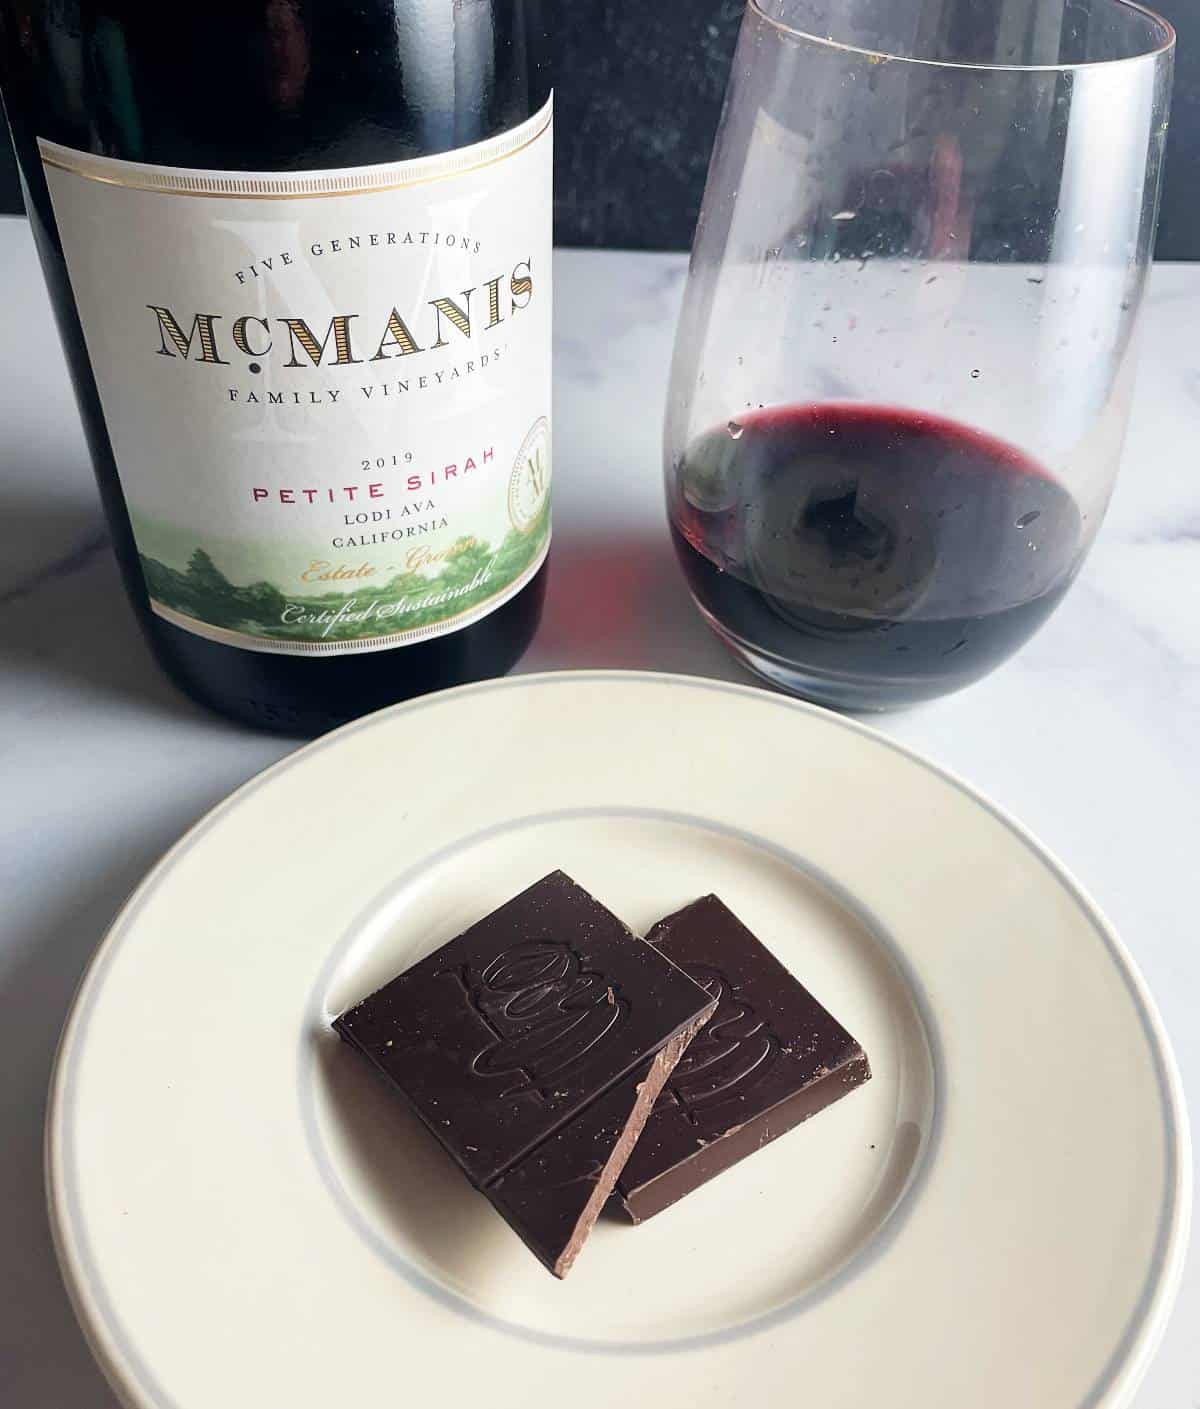 Two small pieces of dark chocolate on a little plate, served with McManis Petite Sirah wine.